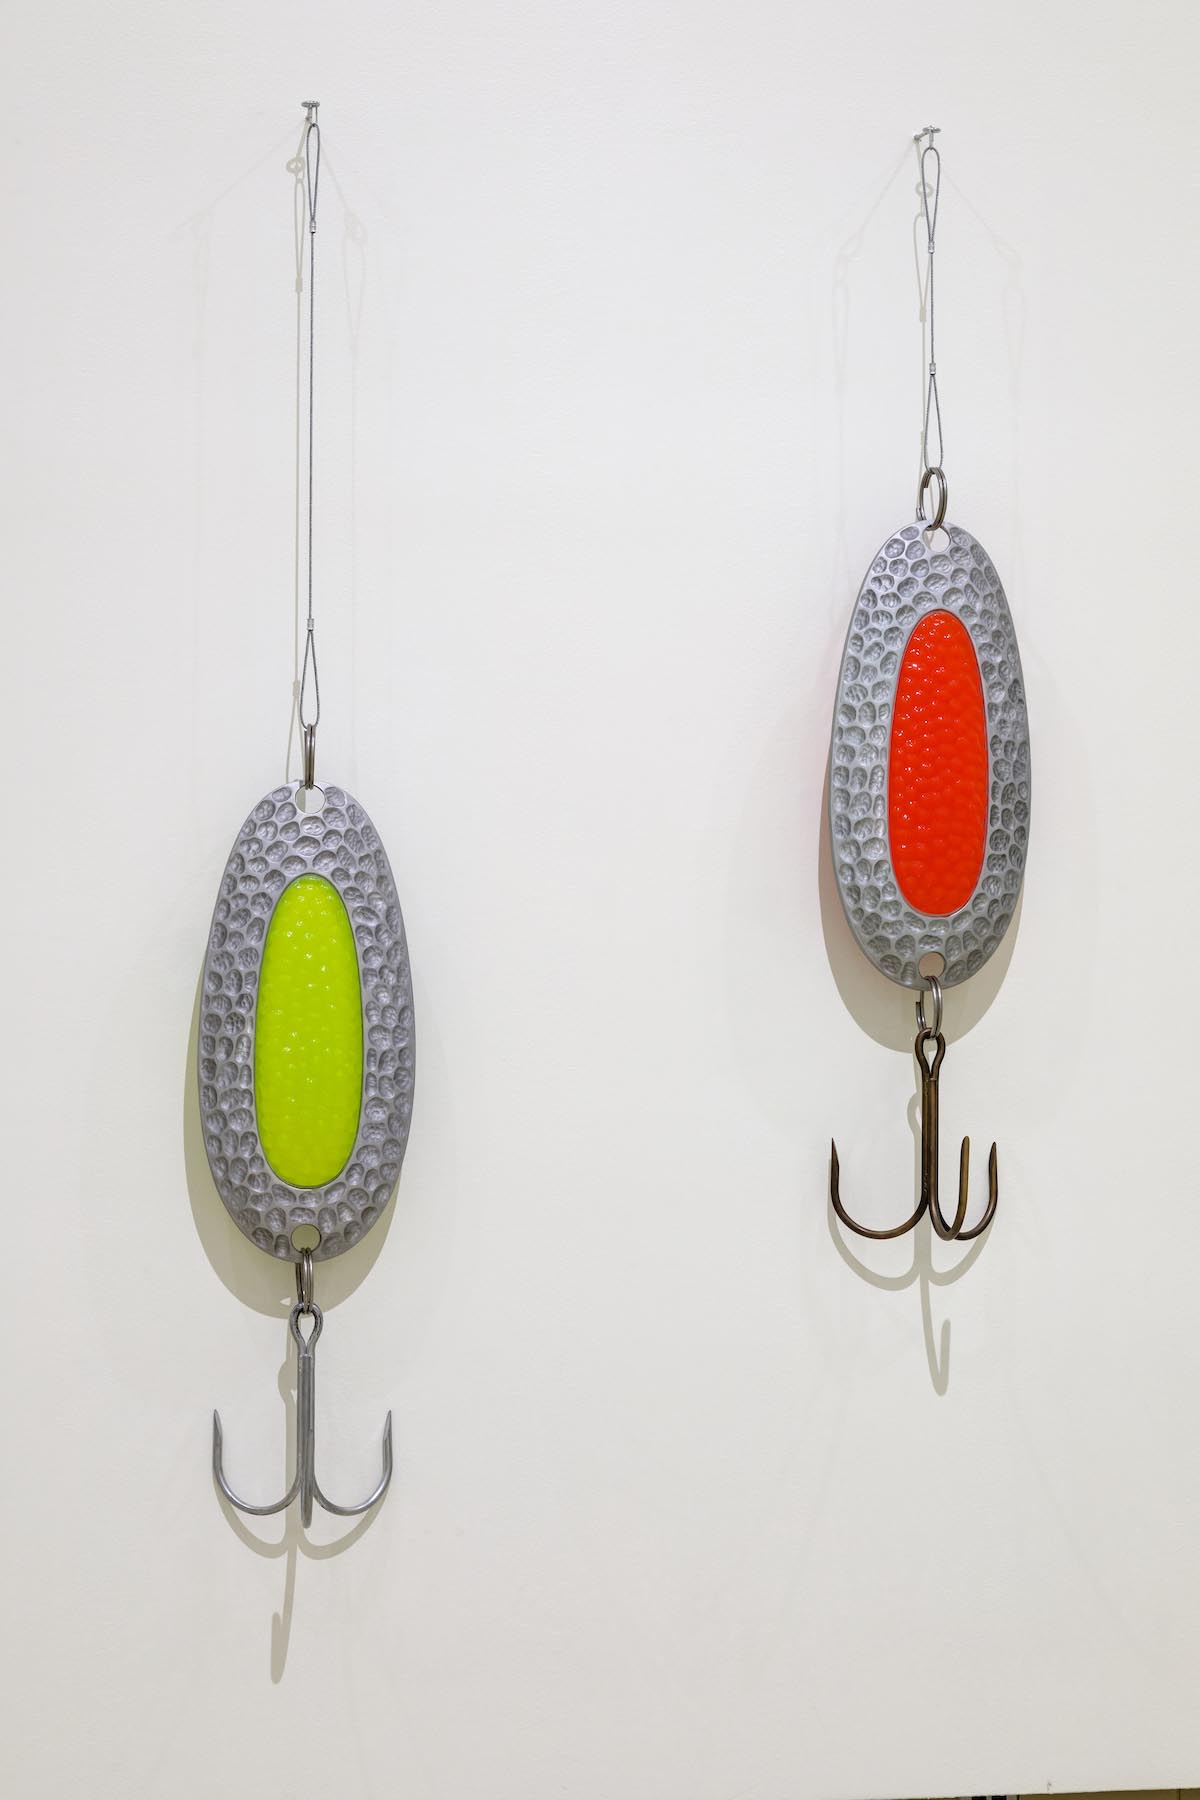 Two oversized spoon fishing lures, each measuring over five feet tall, are installed on a white gallery wall. Each has a hook attached. One has a fluorescent green centre and the other red.